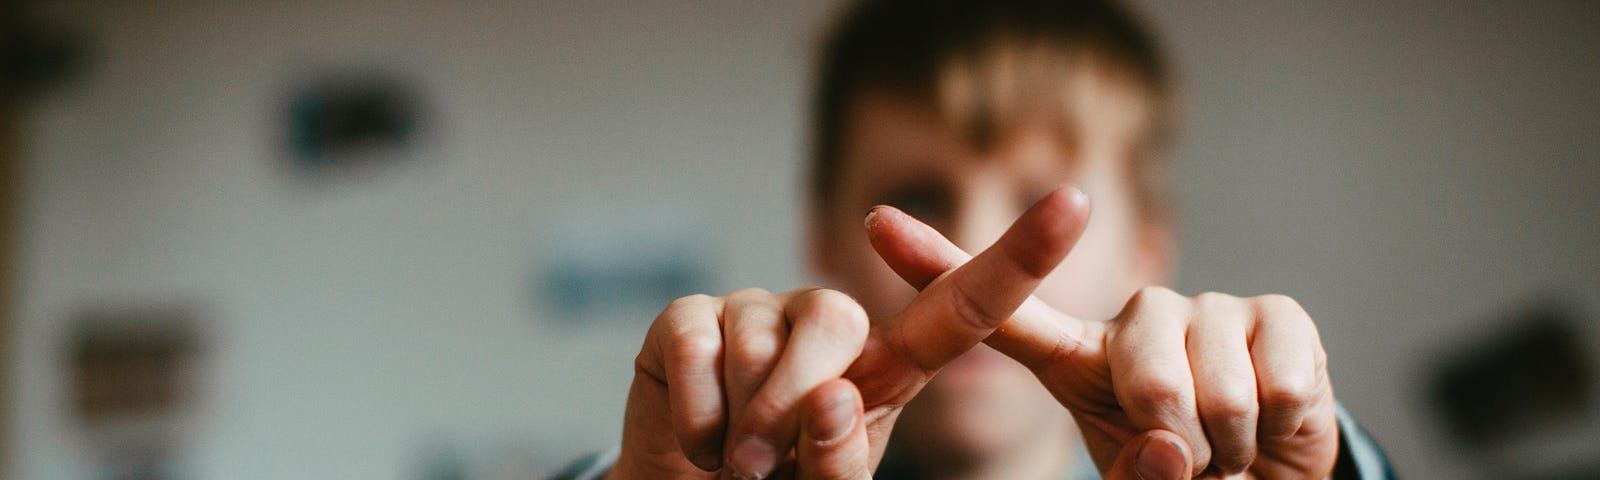 A young kid with a “X’ formed from his two forefingers as a sign of ‘no’.